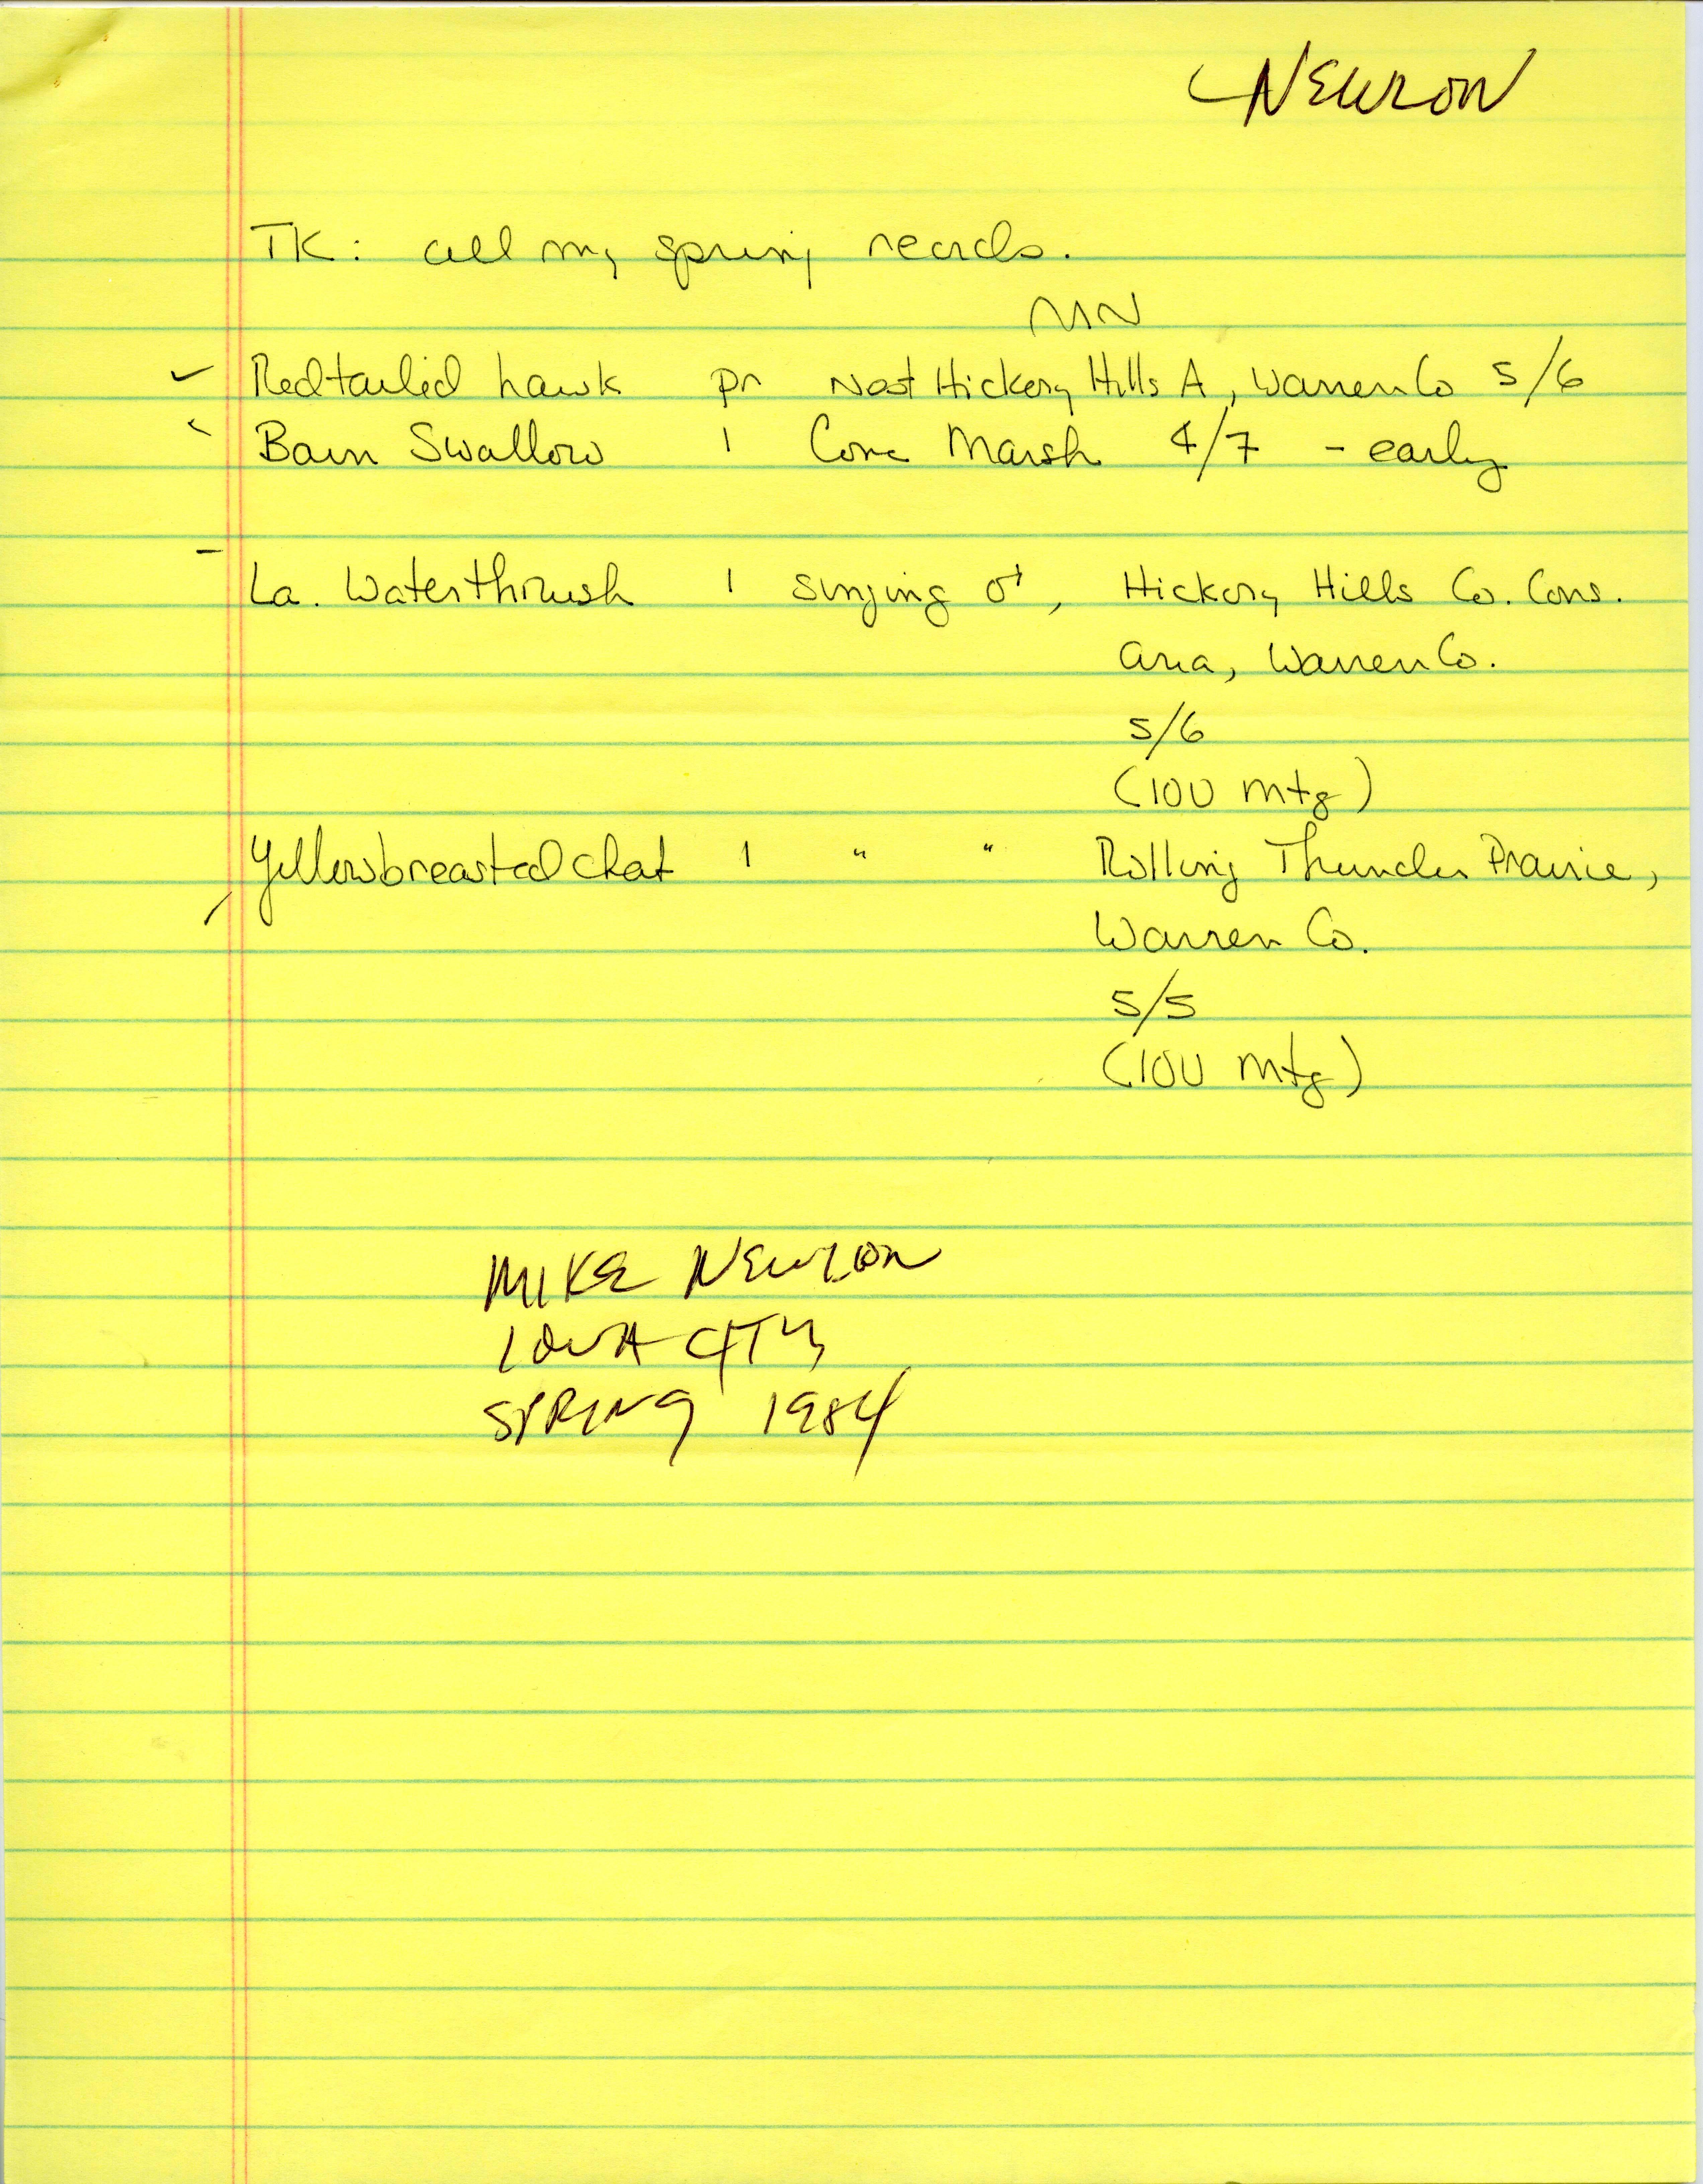 Field notes contributed by Michael C. Newlon, spring 1984